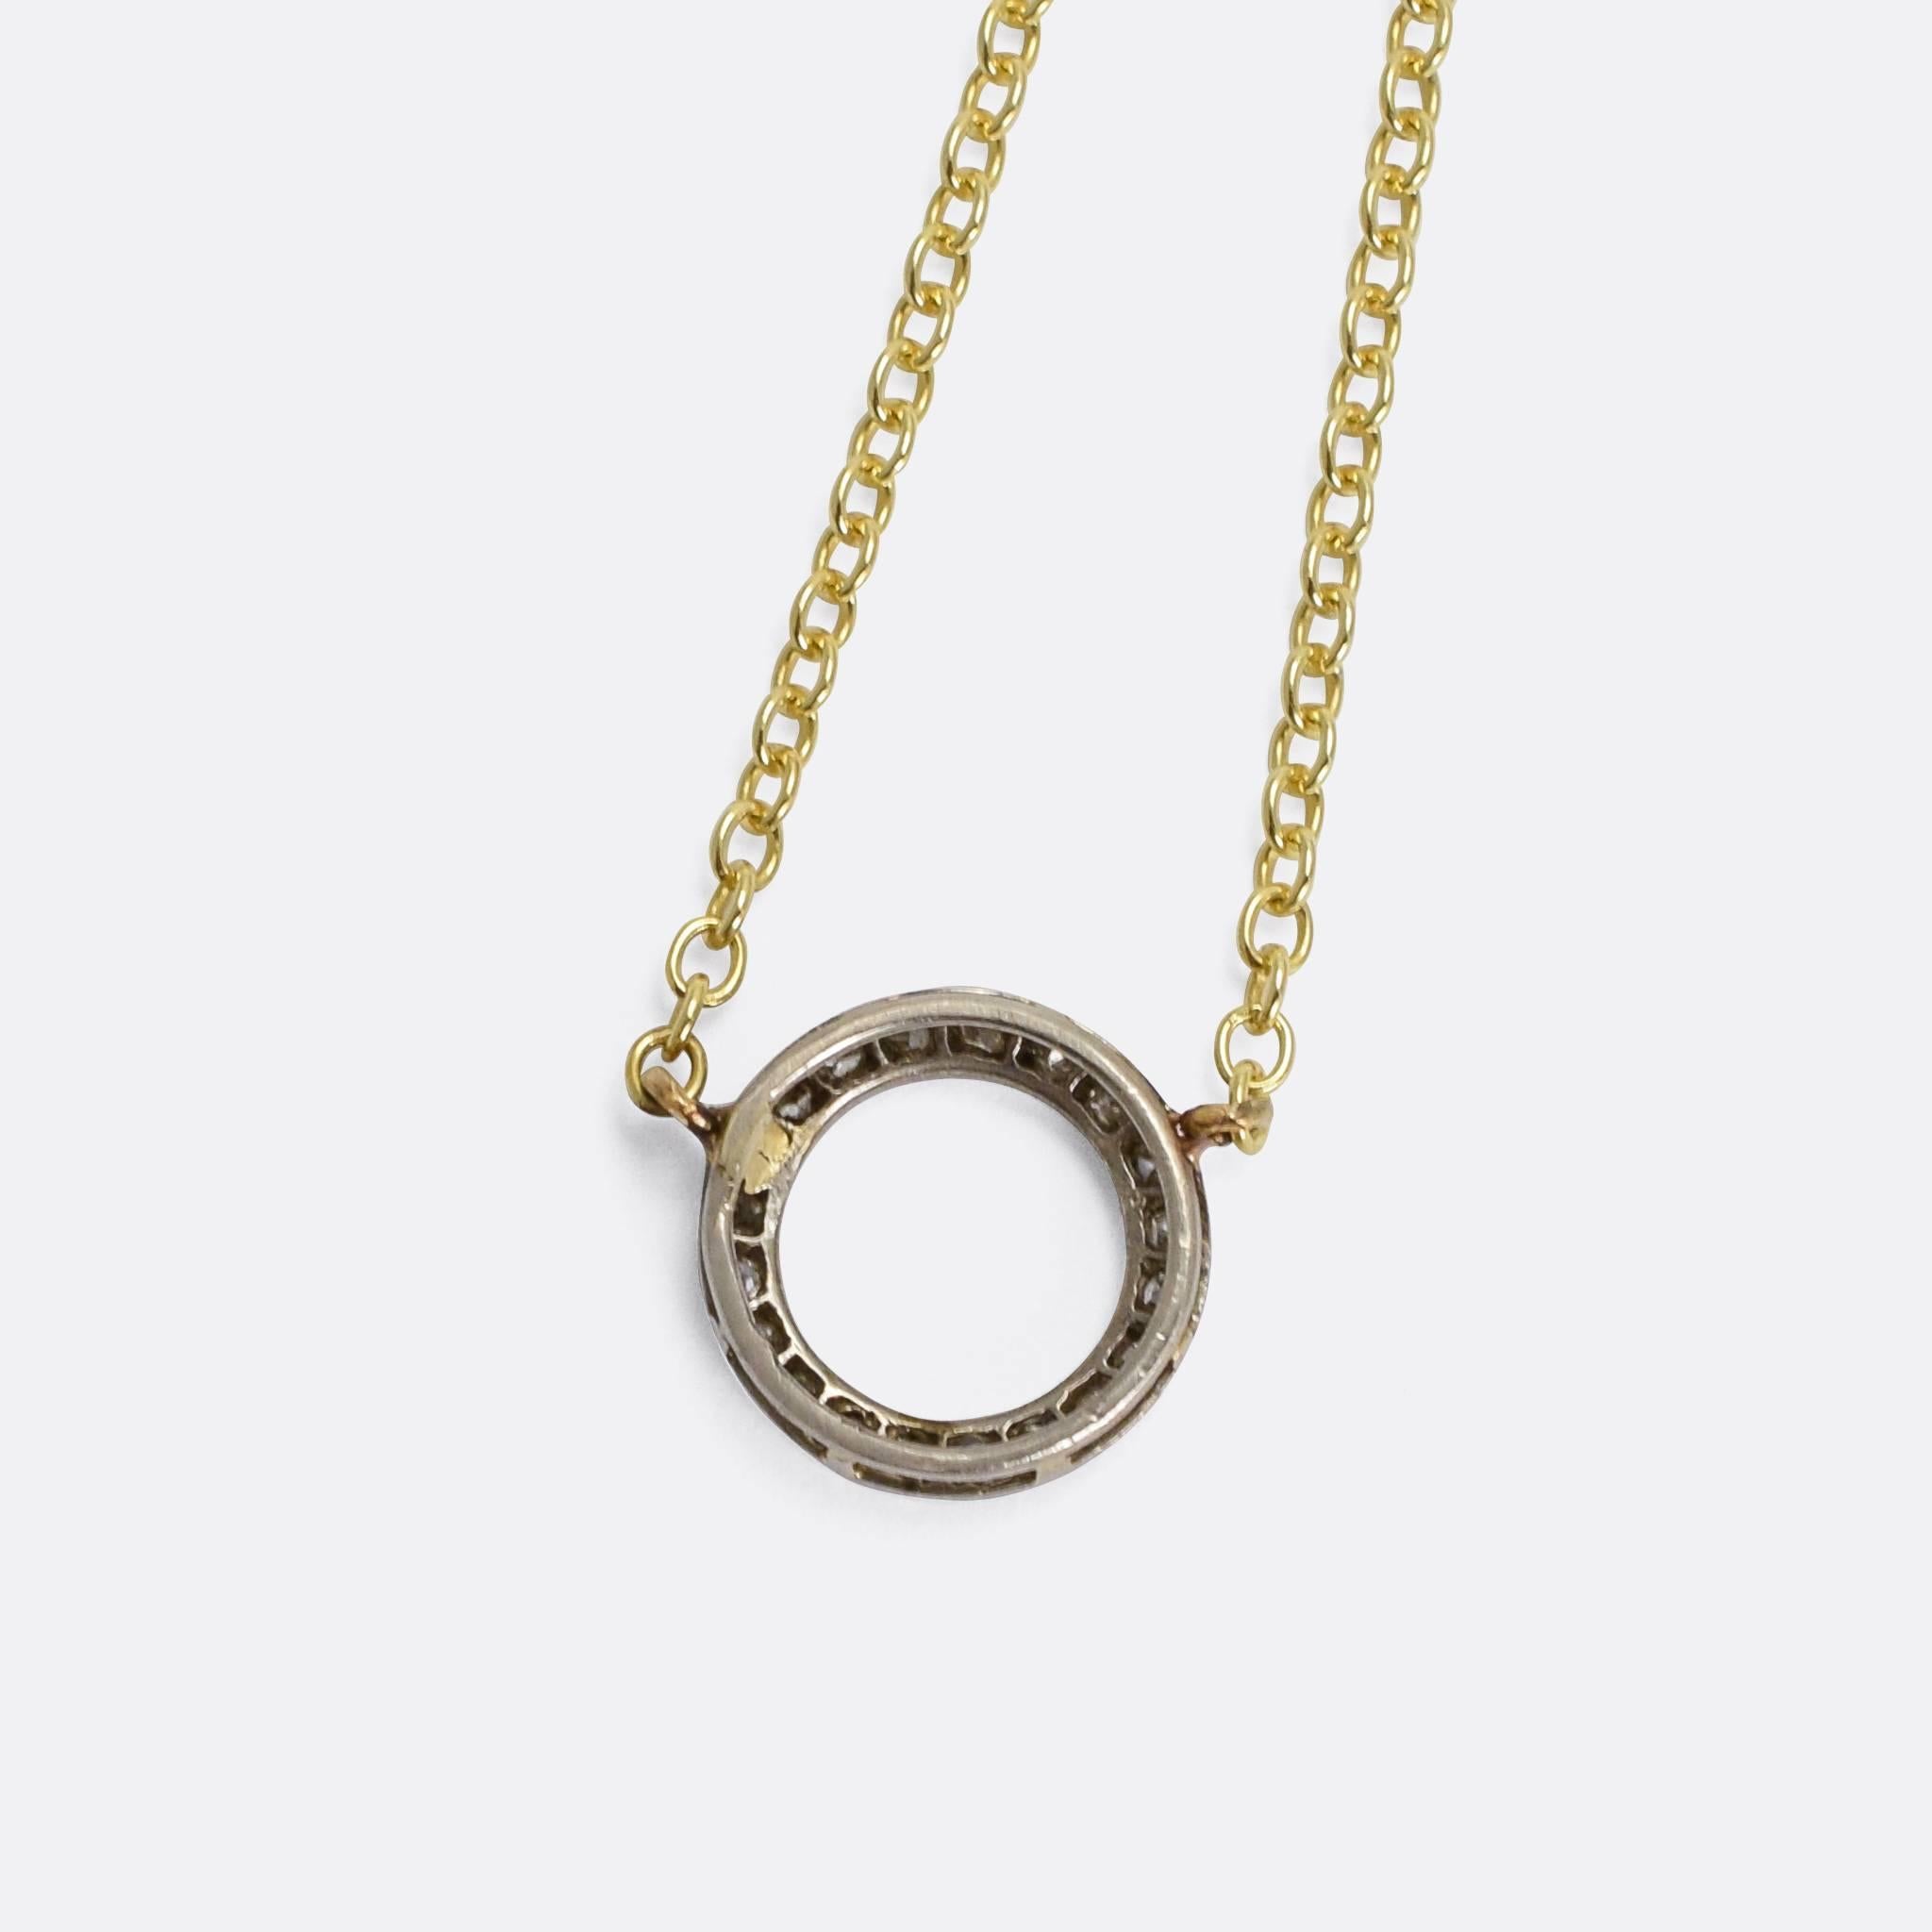 A stylish and unique Art Deco era pendant necklace, the head modelled as a diamond-set halo and finished in fine platinum millegrain. Originally a stick pin, we have added a 9k gold chain converting the piece into a very wearable necklace.

STONES